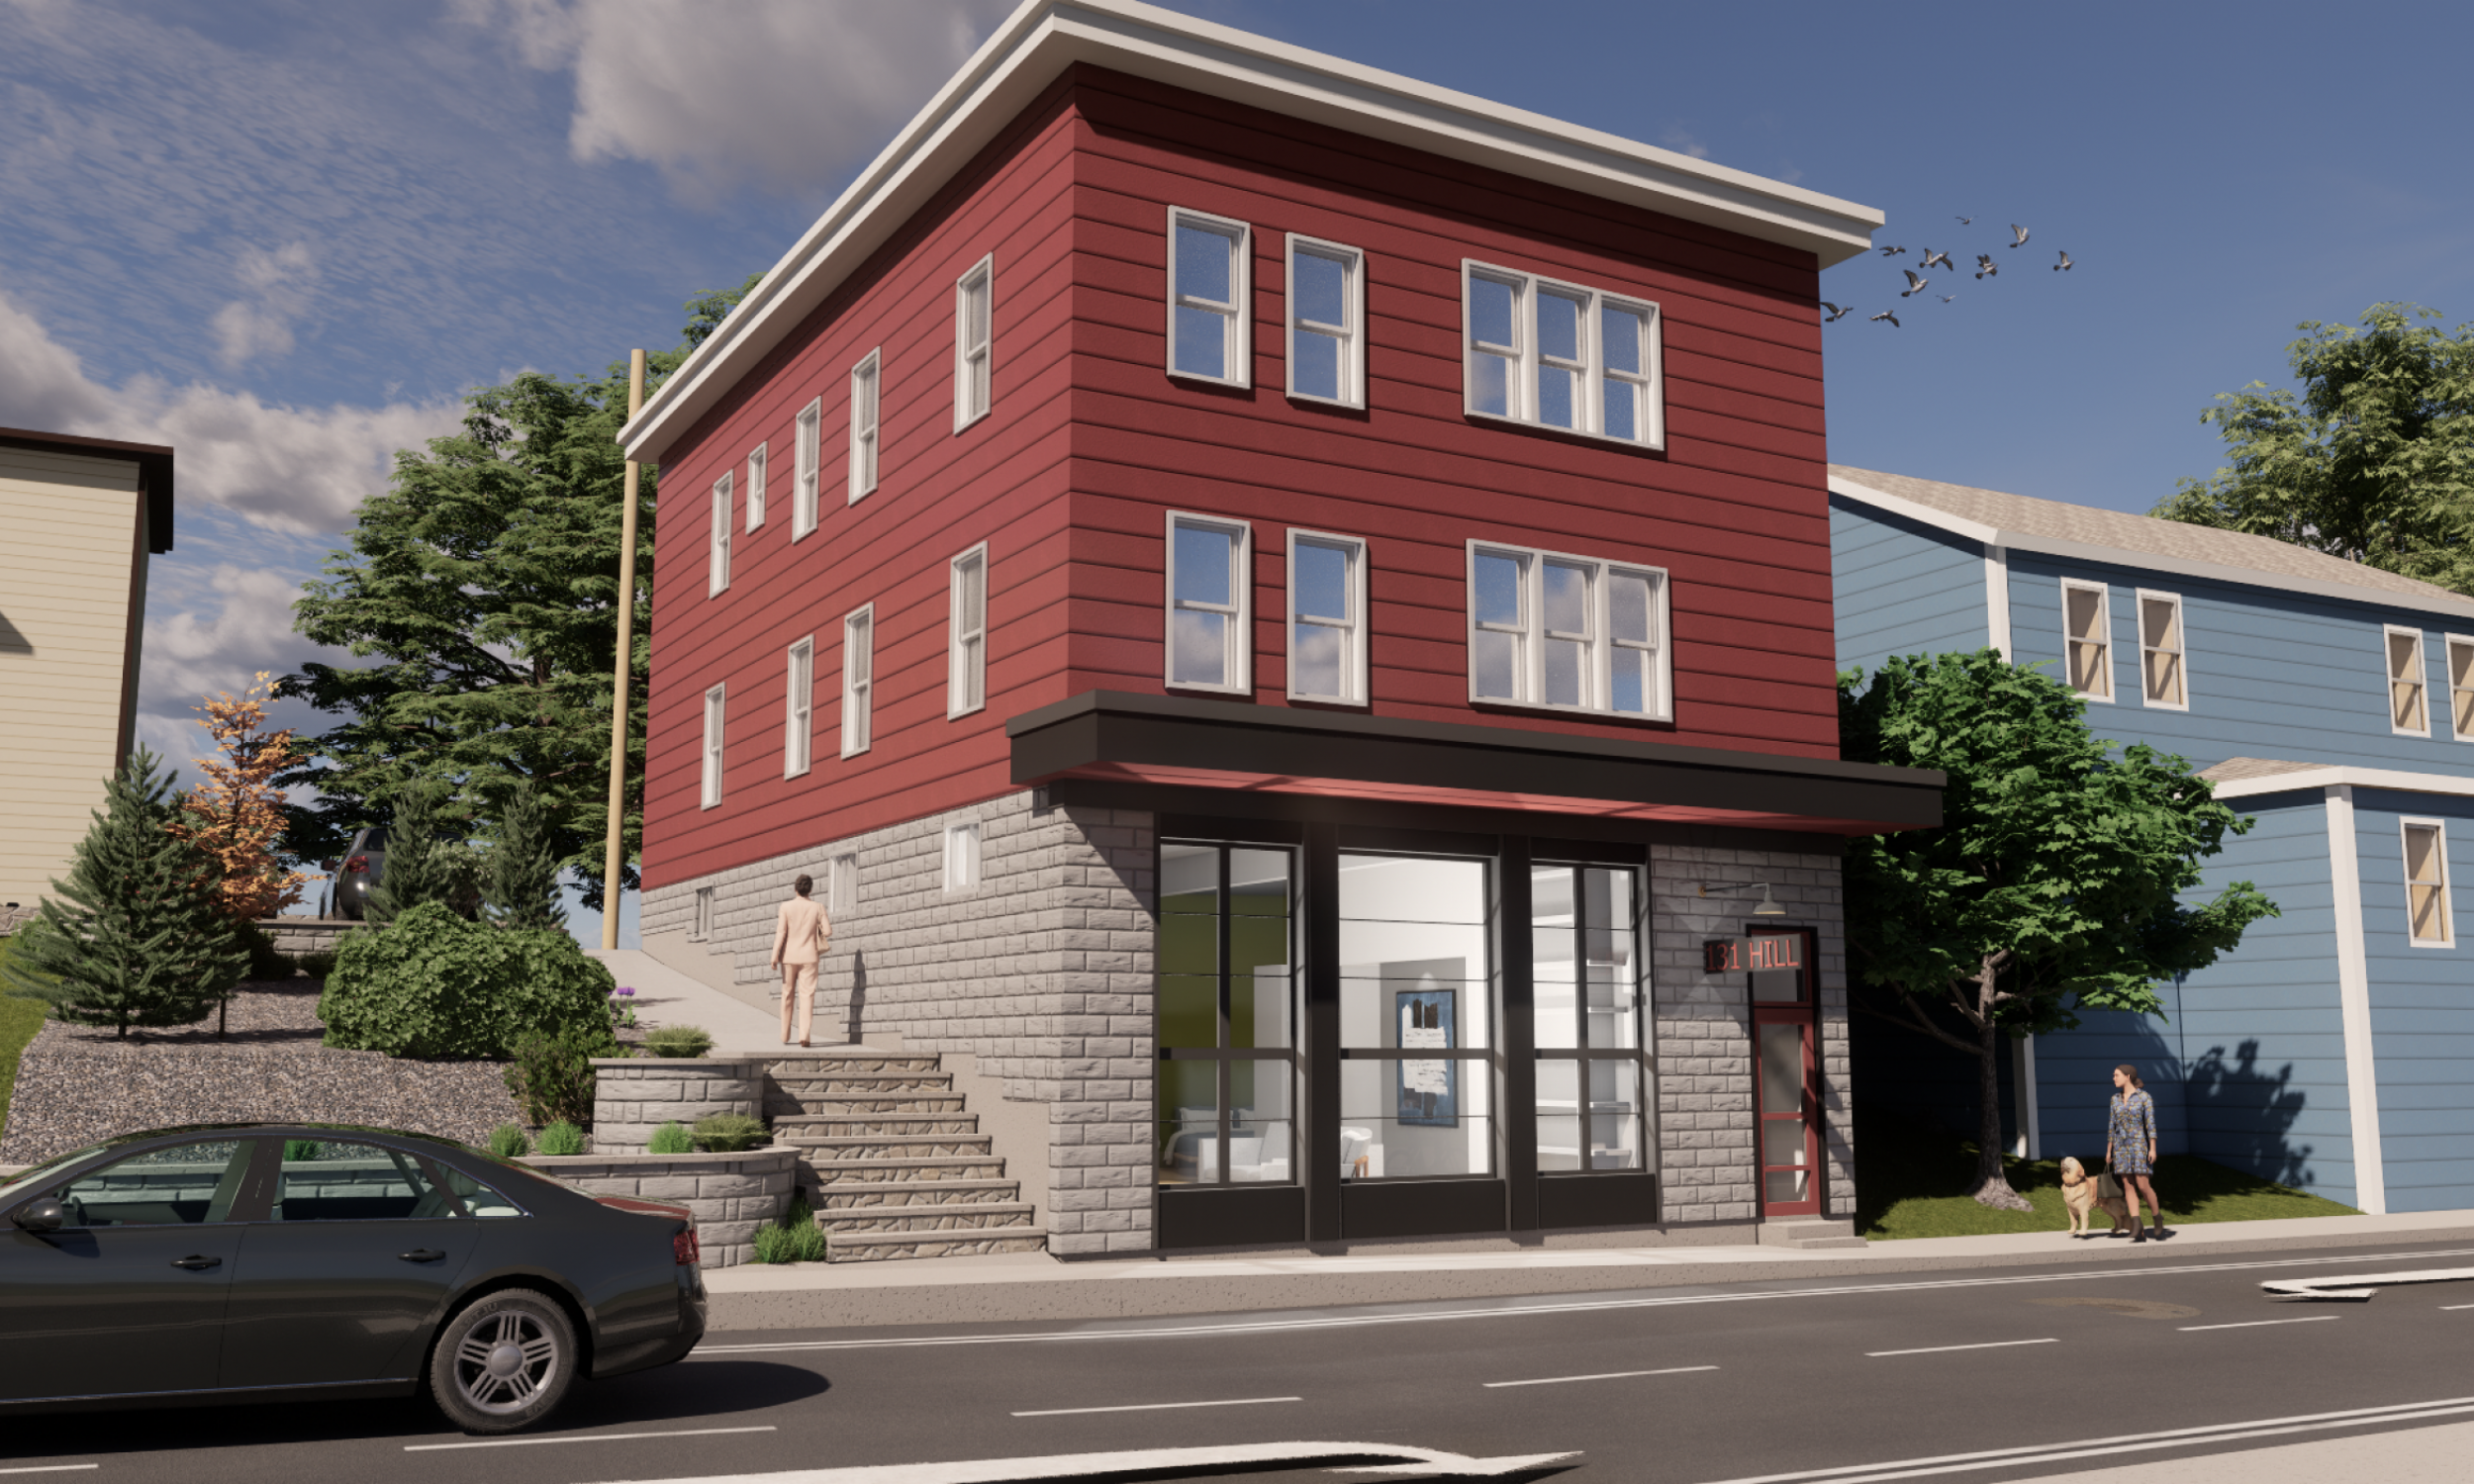 Exterior rendering, storefront, maine architect, adaptive reuse